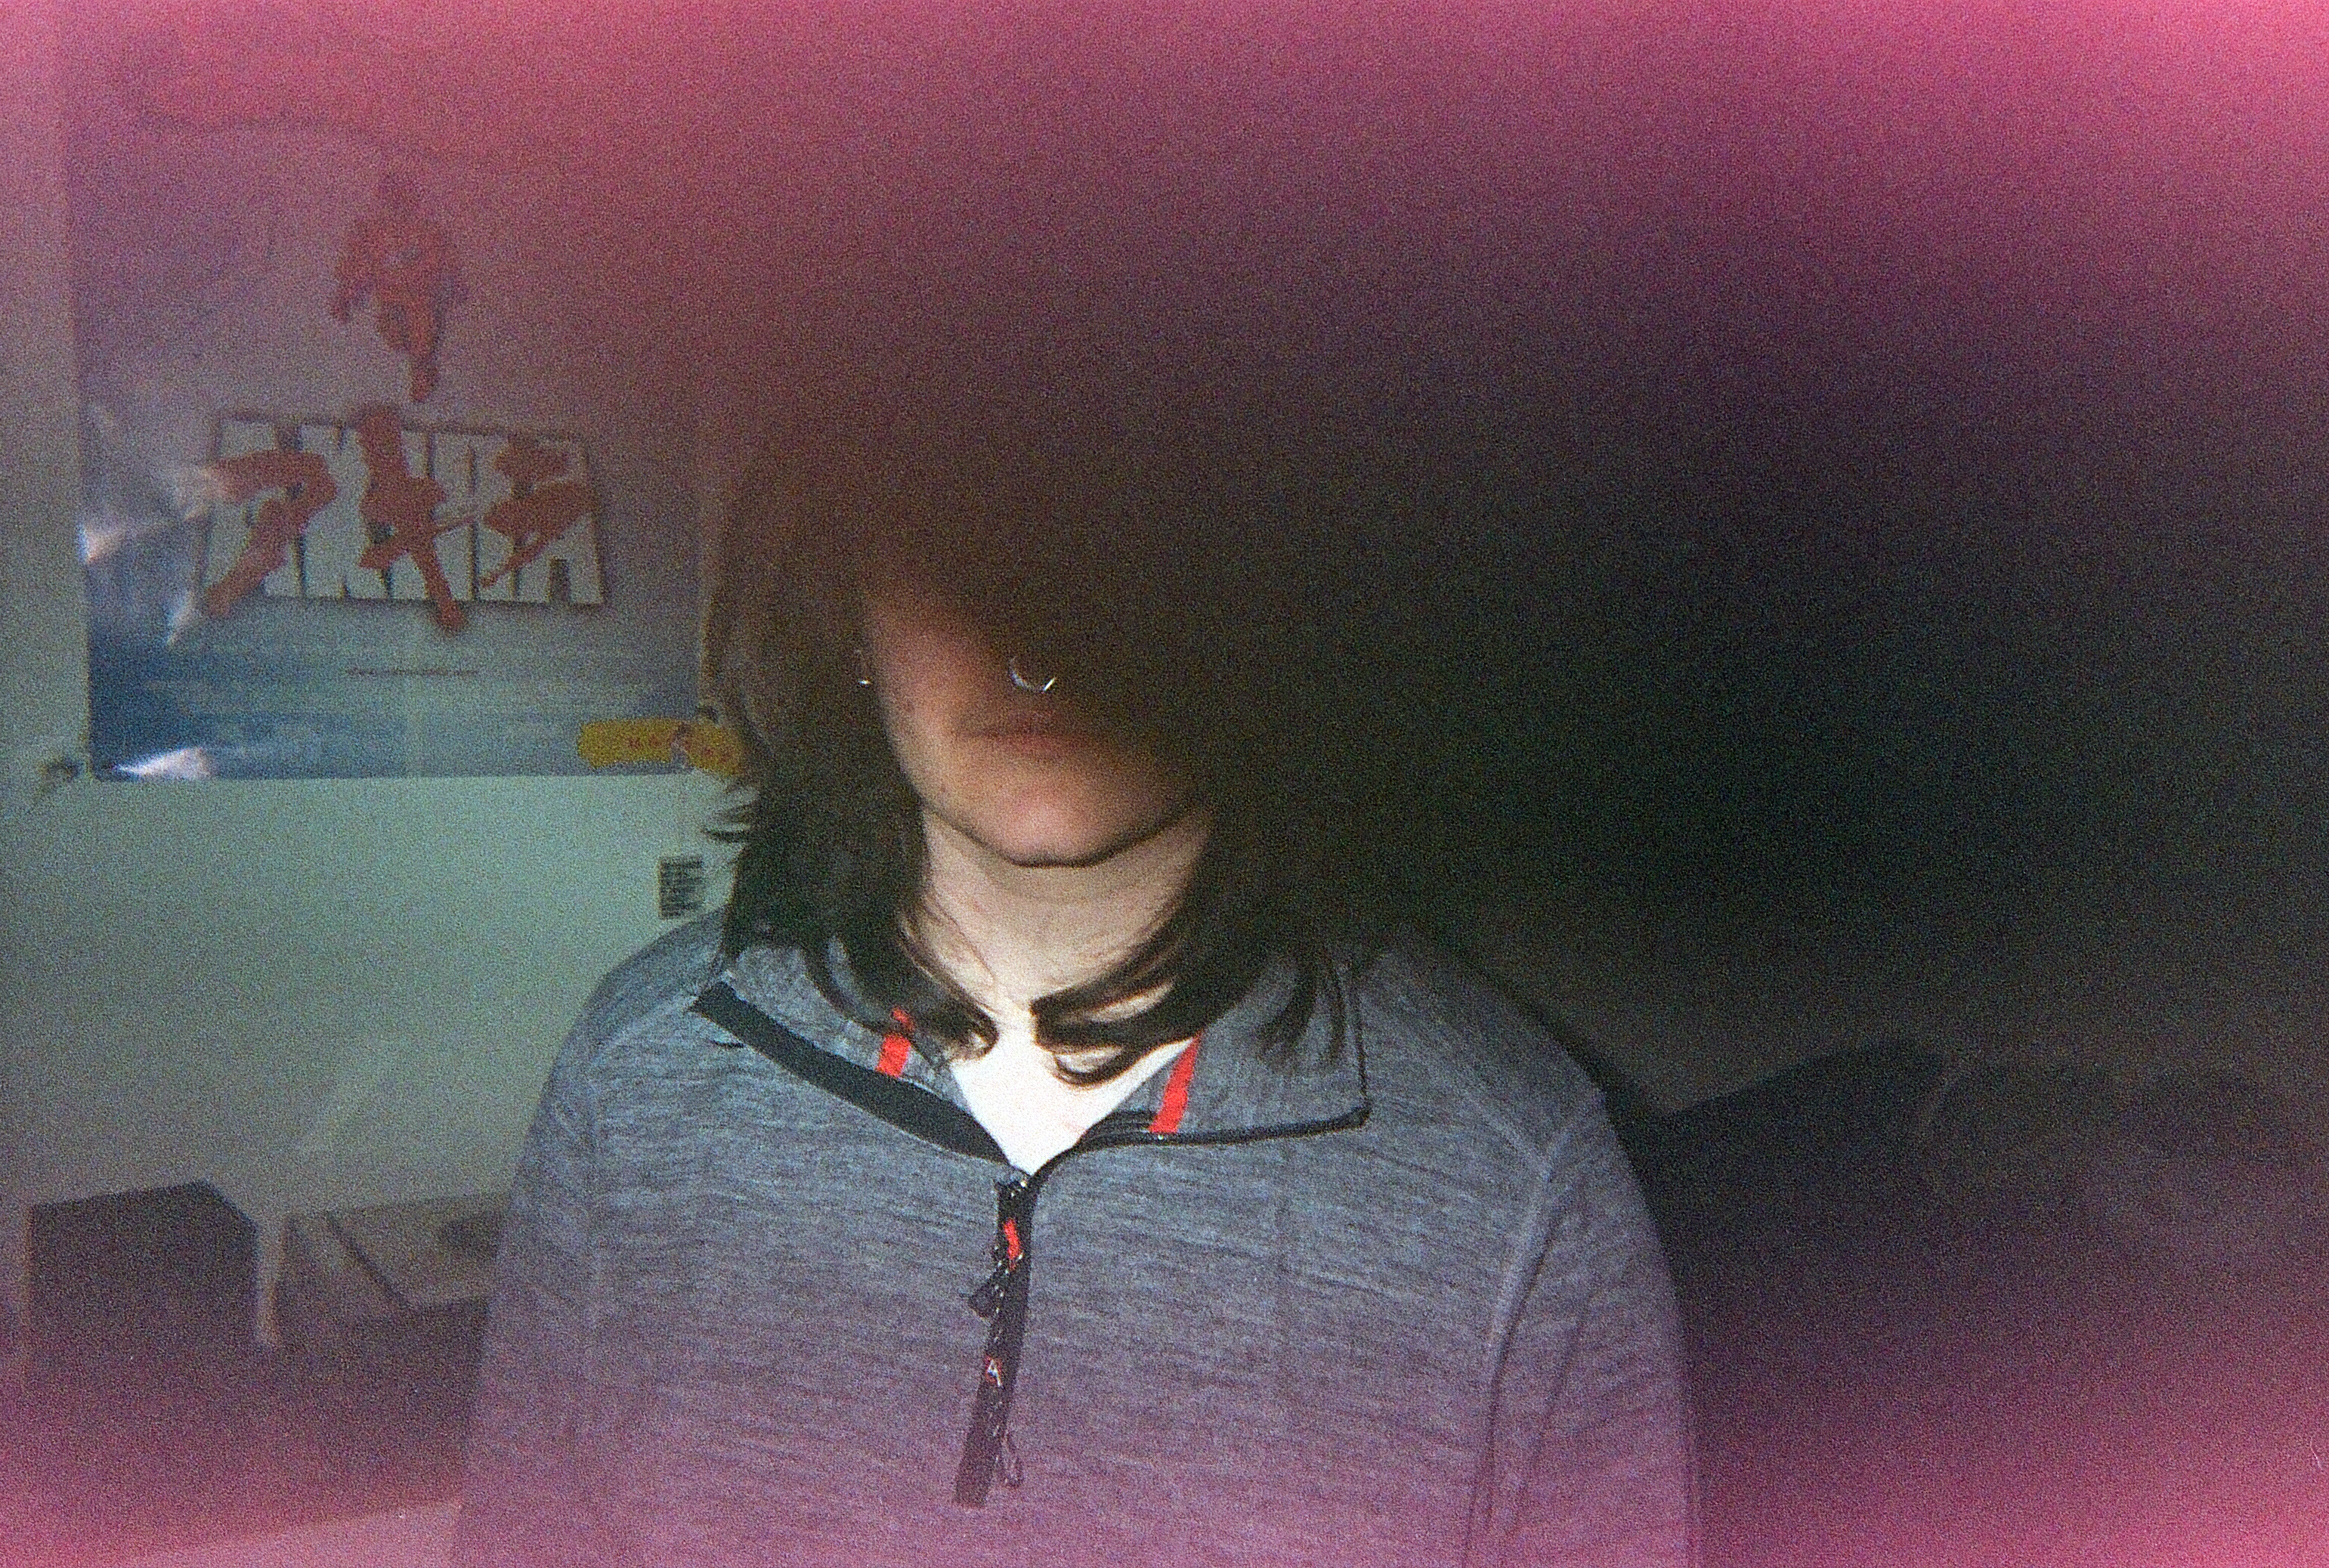 Film image of a white man with long, brown hair wearing a grey quarter-zip. A large shadow obscures the upper half of his face. The image has pink borders due to film expiration.